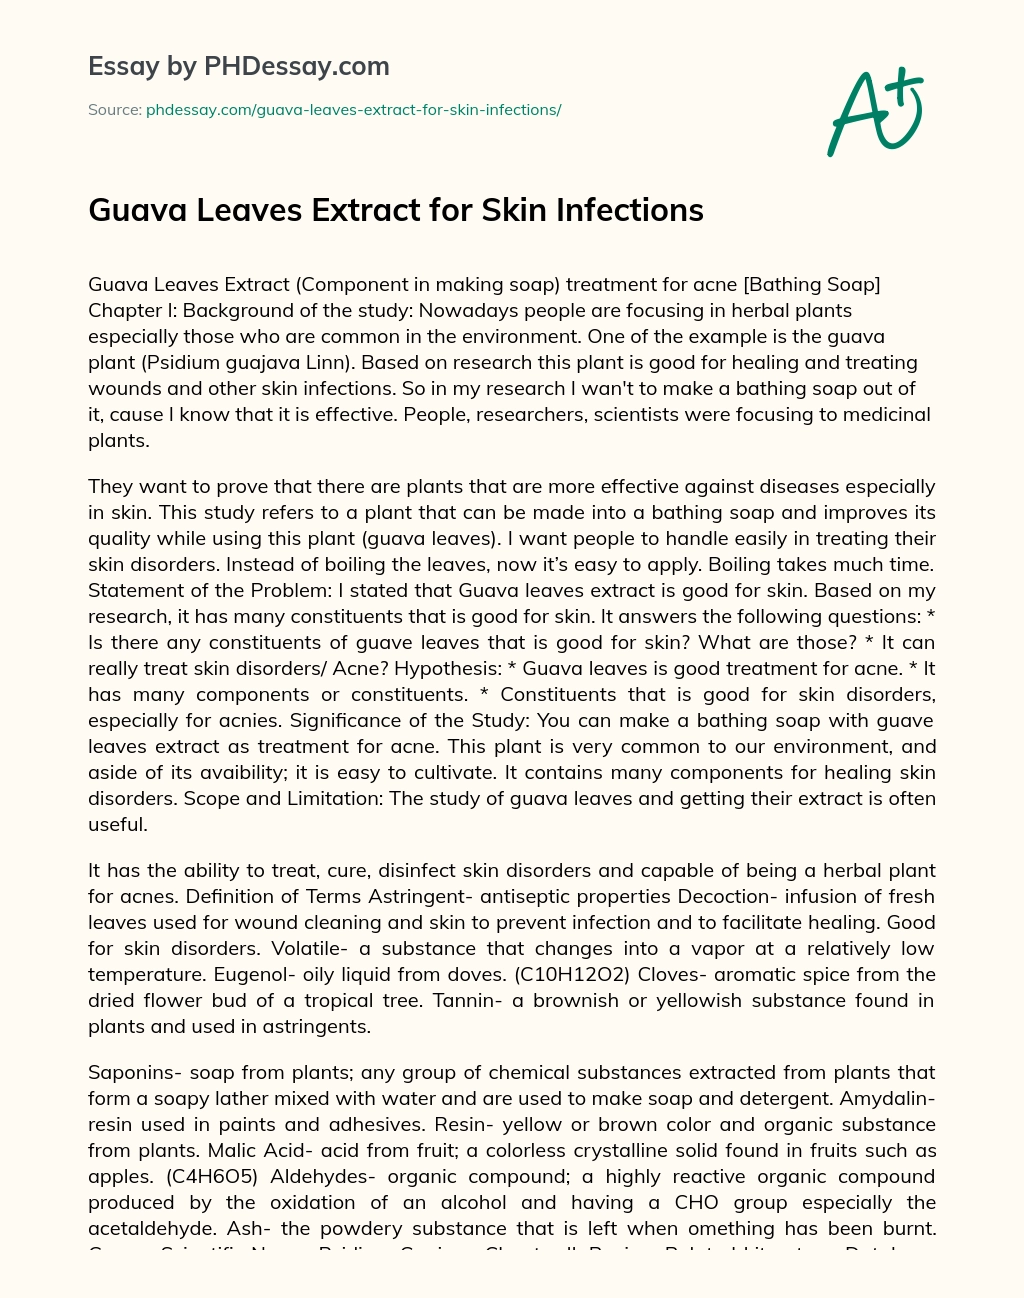 Guava Leaves Extract for Skin Infections essay